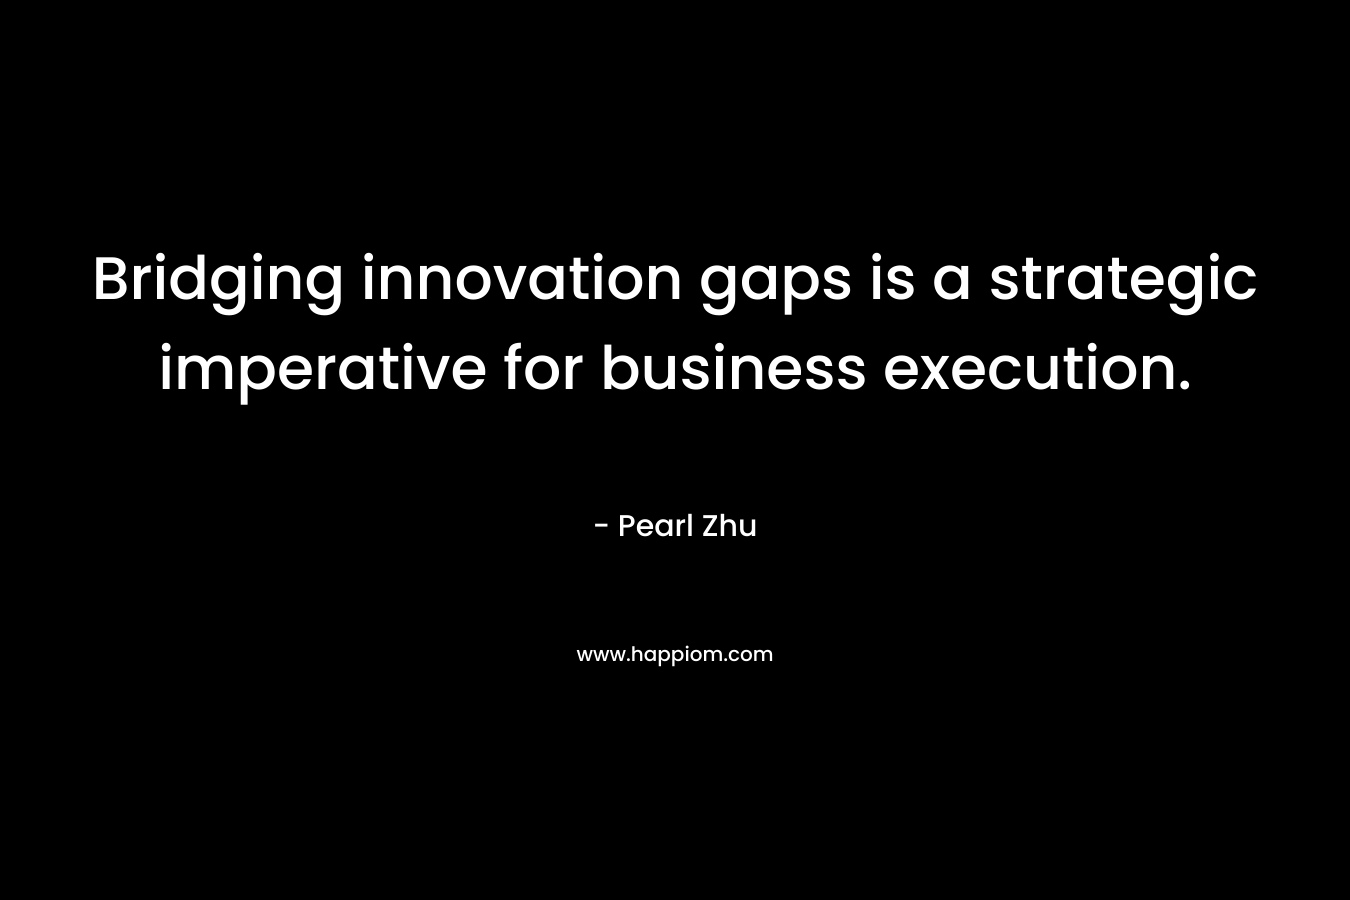 Bridging innovation gaps is a strategic imperative for business execution. – Pearl Zhu